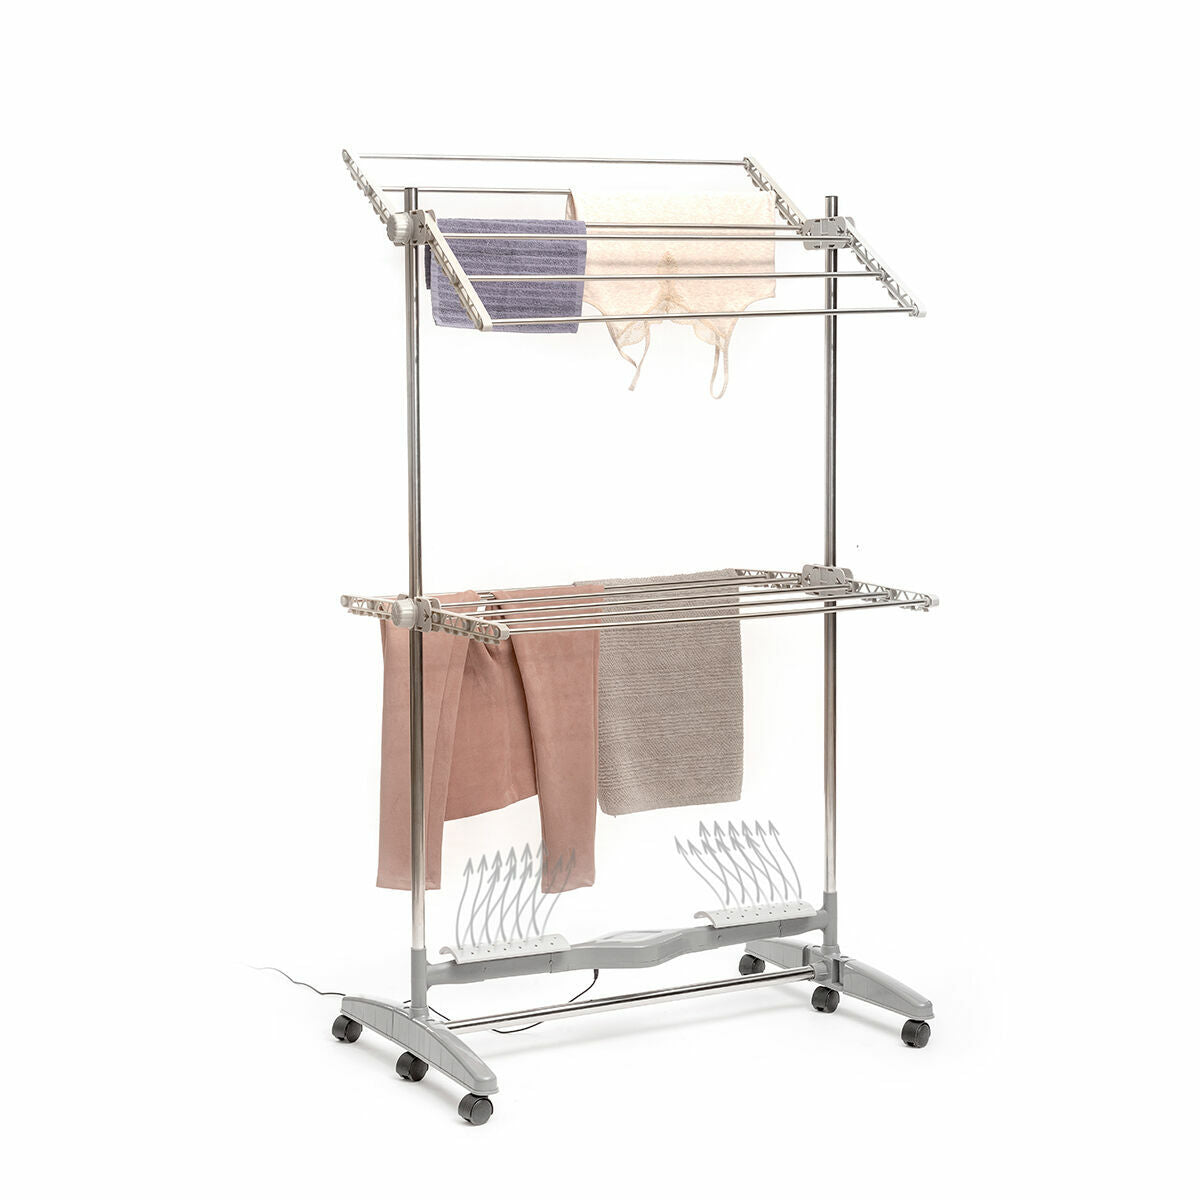 Foldable Electric Drying Rack with Natural Airflow Dryllon InnovaGoods 12 Bars 24 W (Refurbished B)